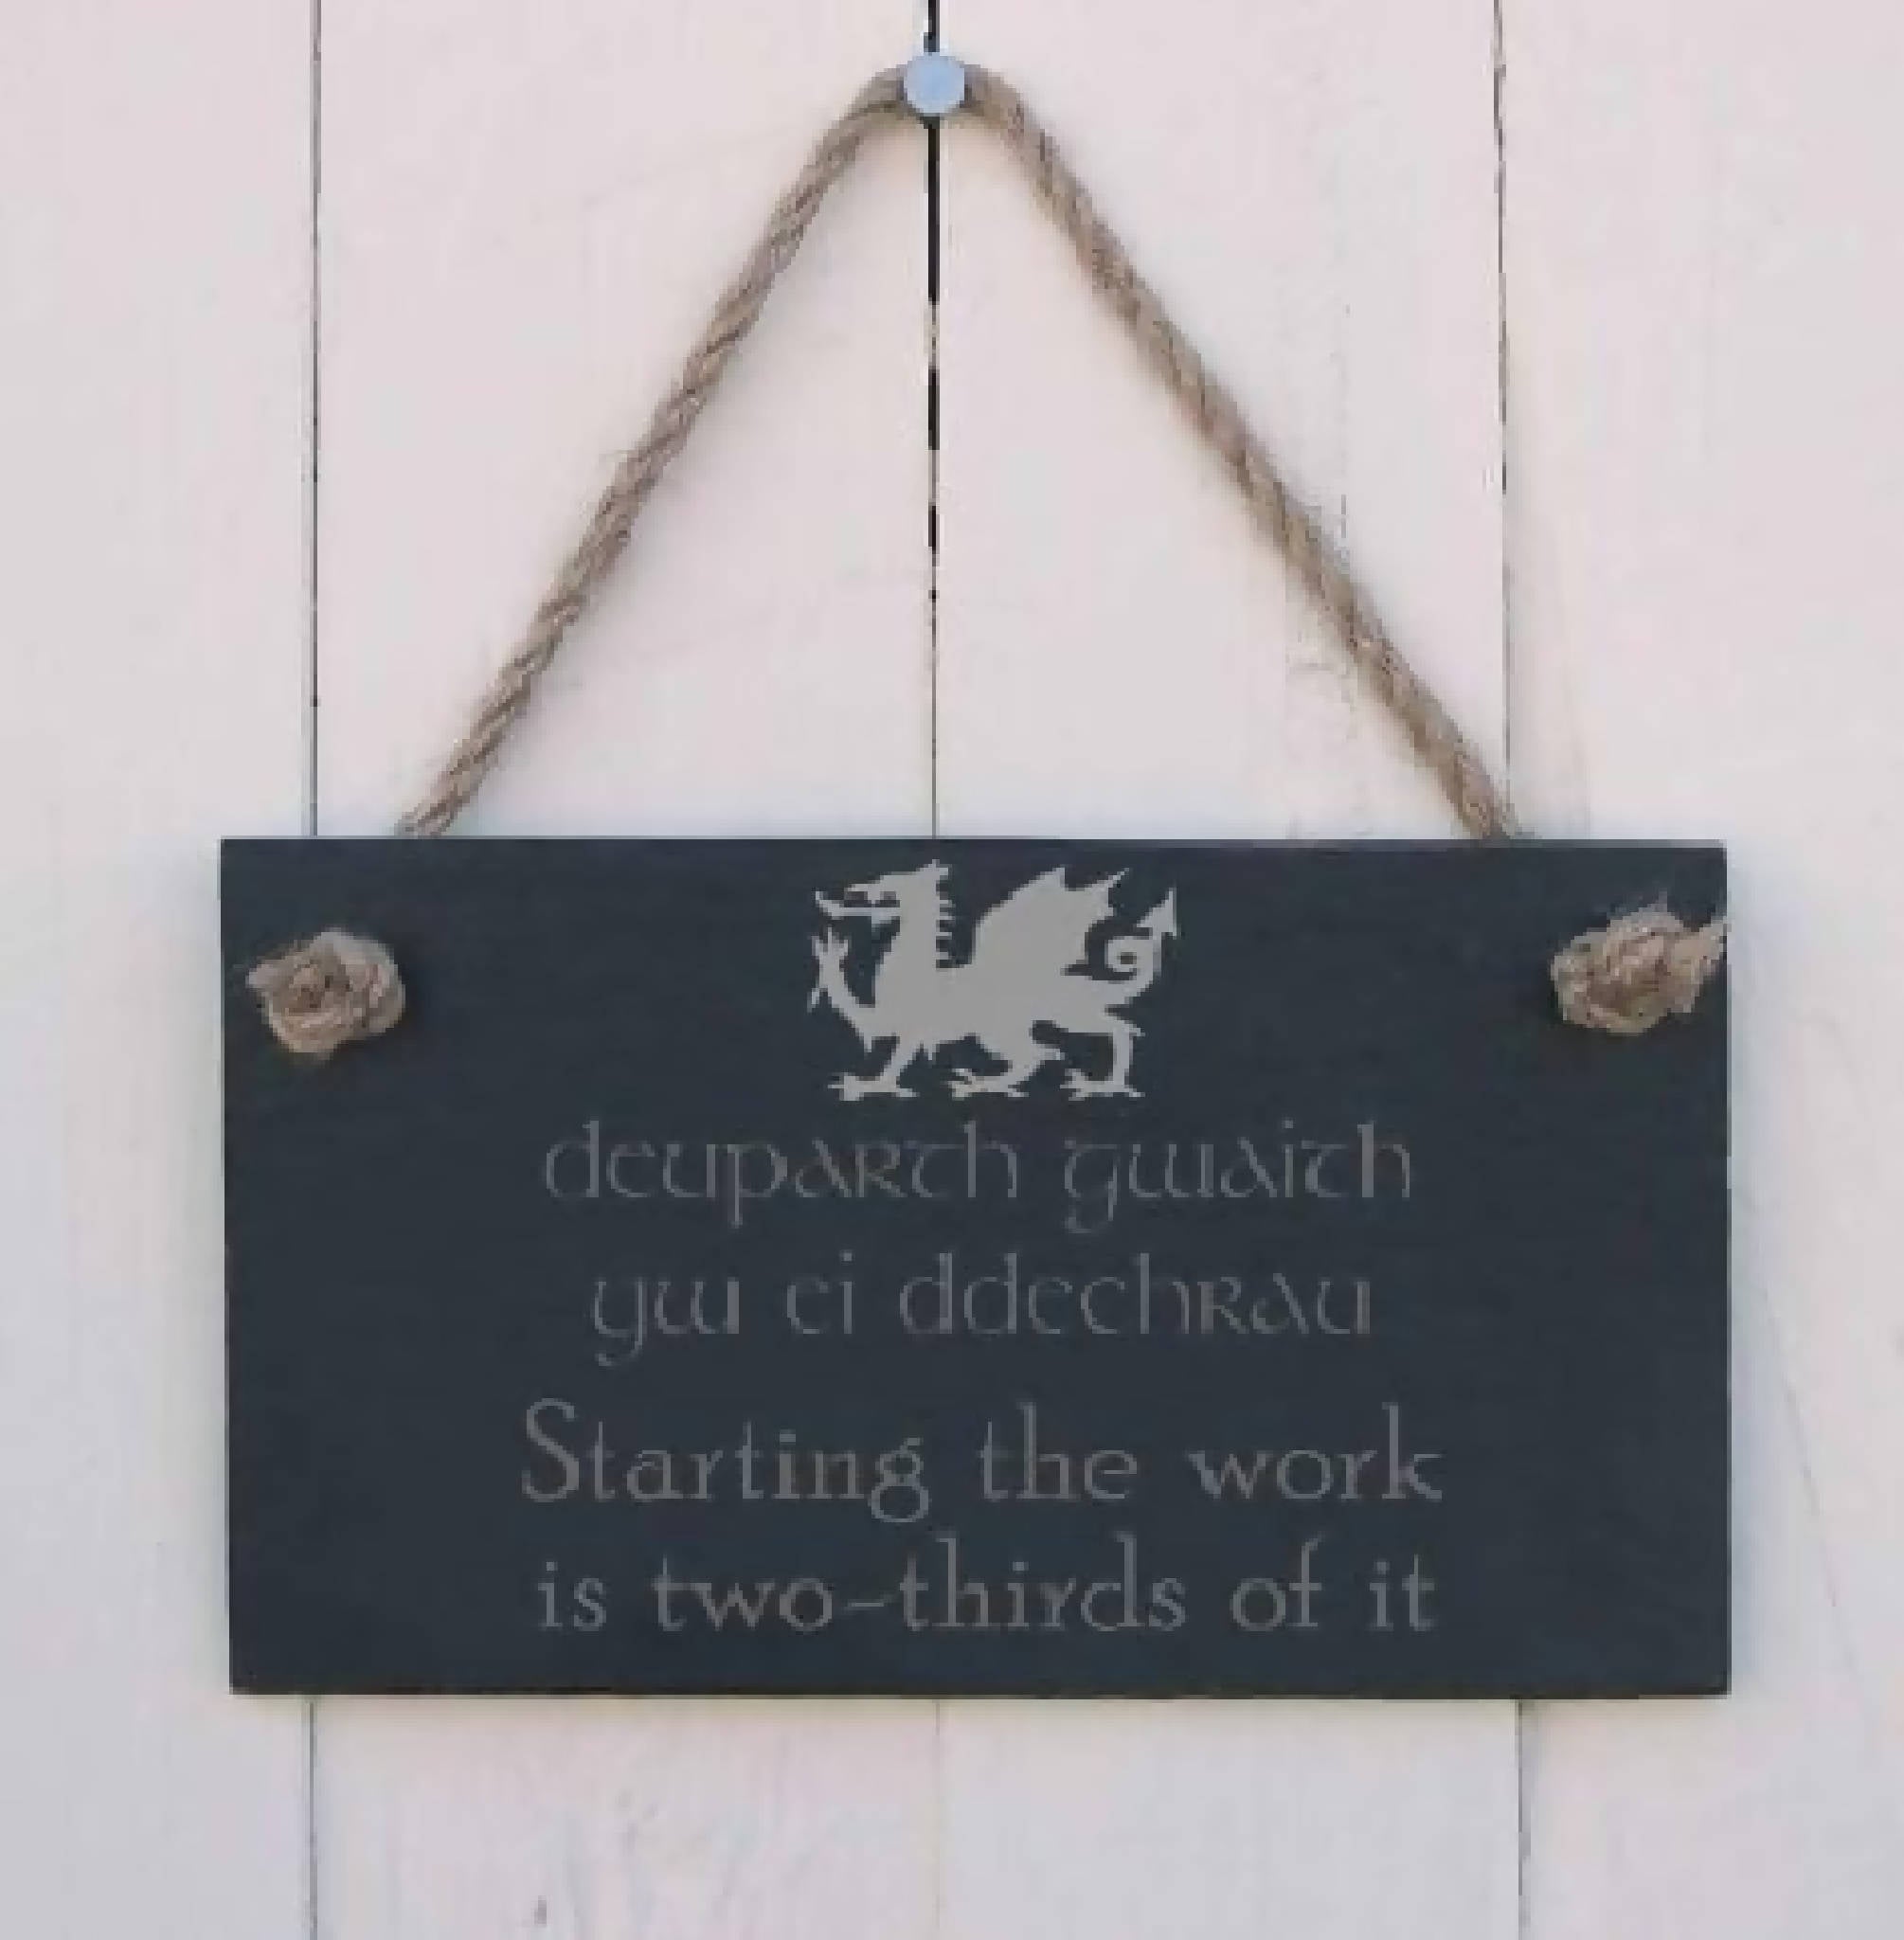 Bi-lingual Welsh slate hanging sign - "Starting the work is two thirds of it"...